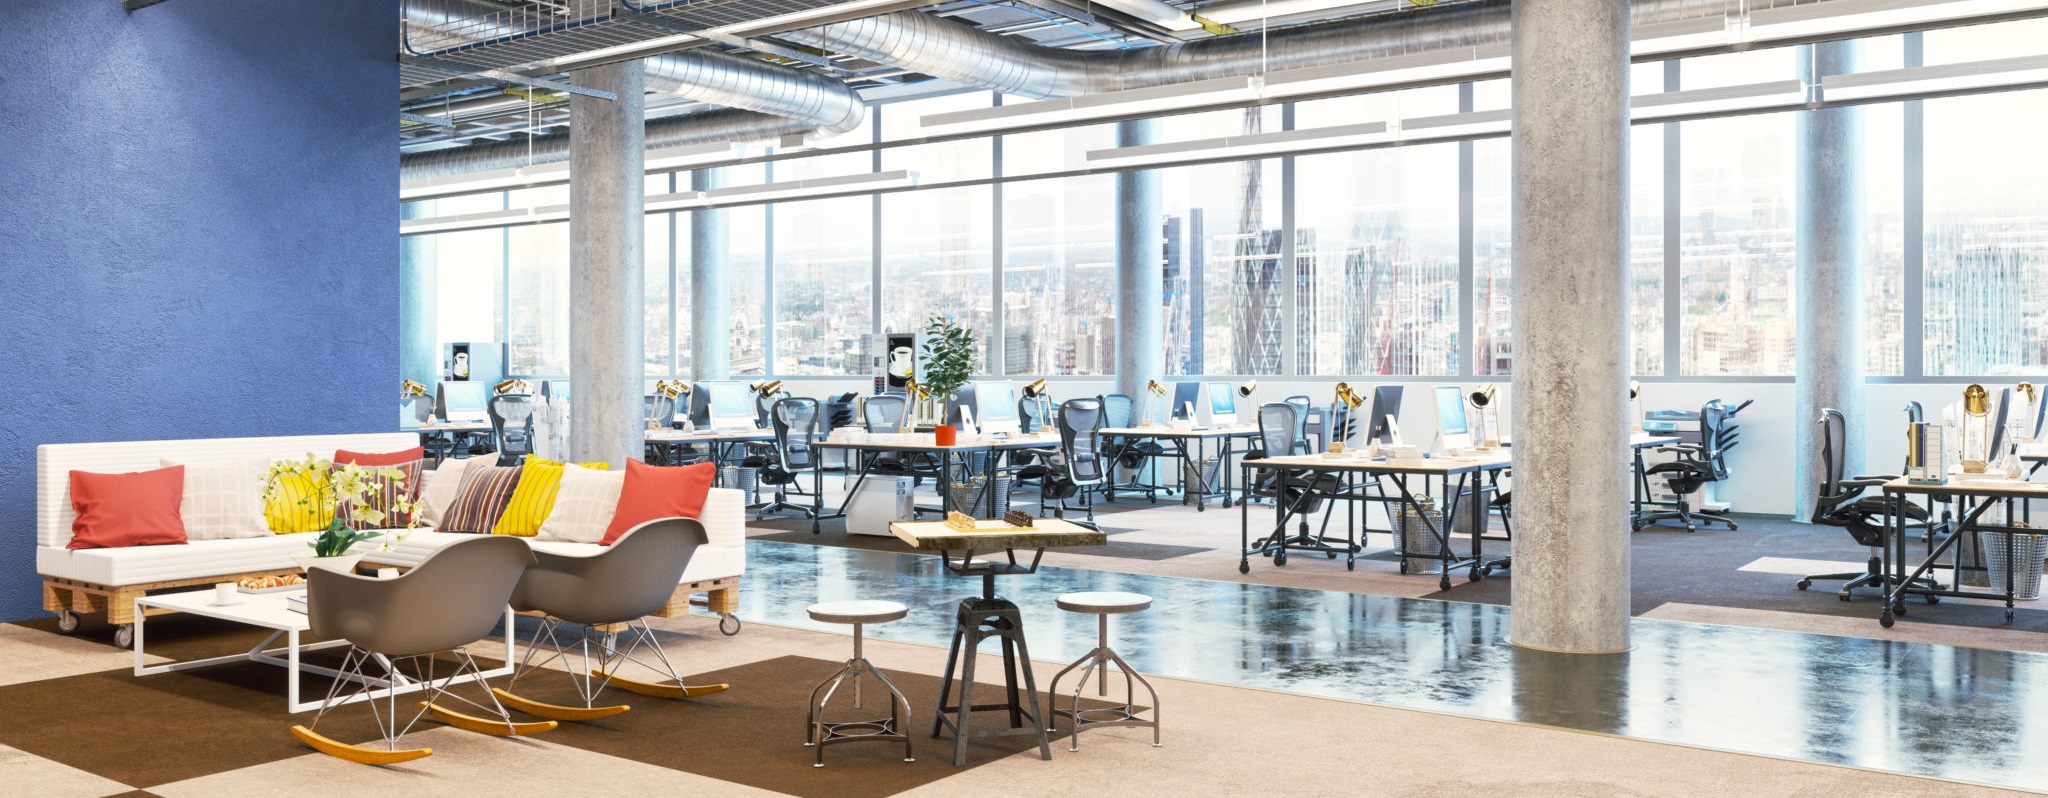 The Future of Office Design – Open Plan or Closed? – CADagency